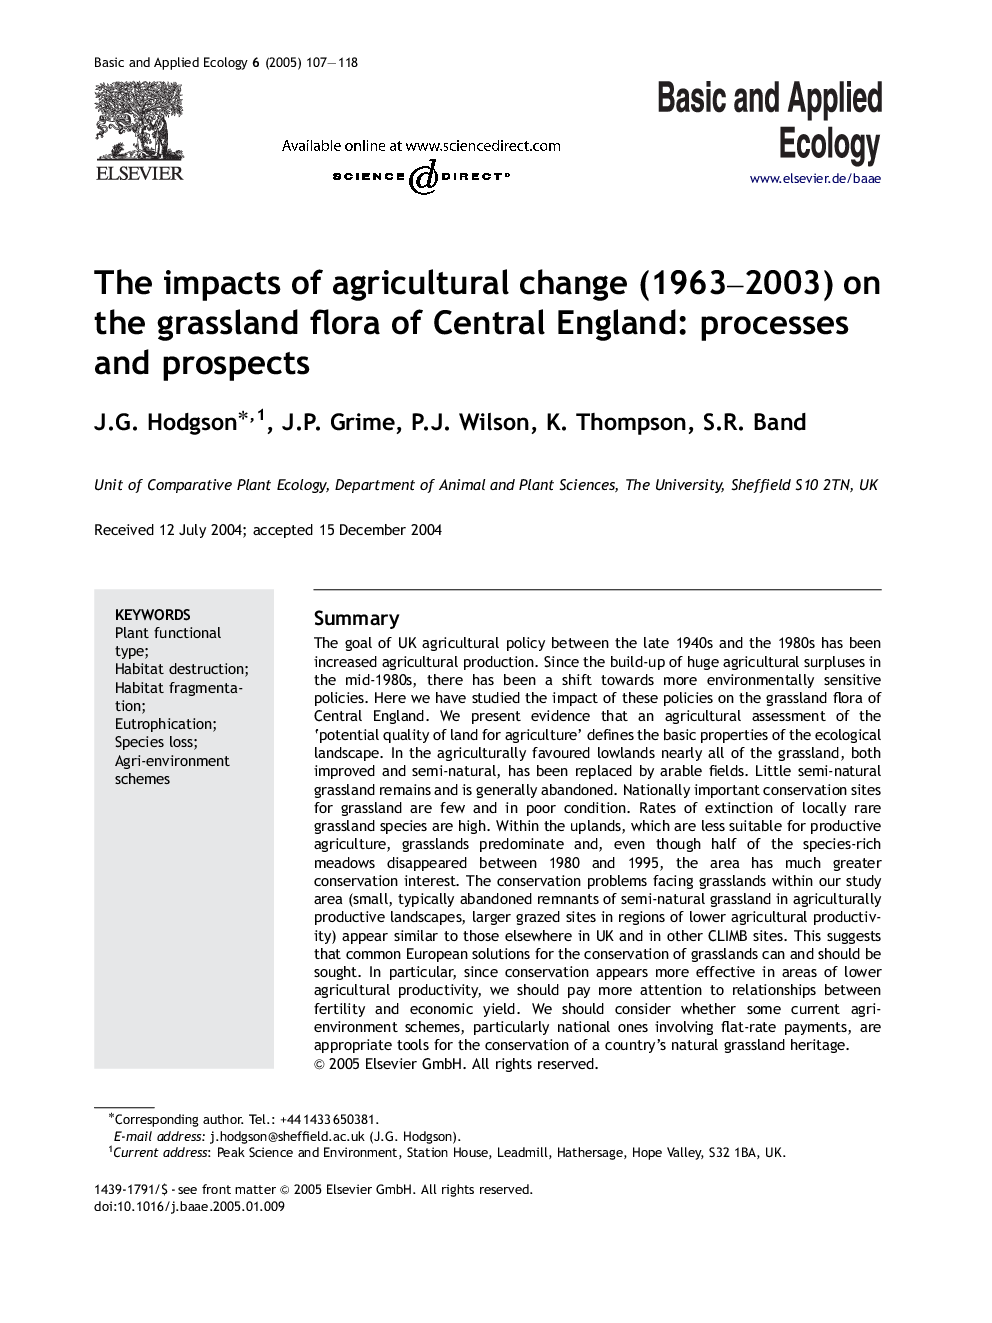 The impacts of agricultural change (1963-2003) on the grassland flora of Central England: processes and prospects